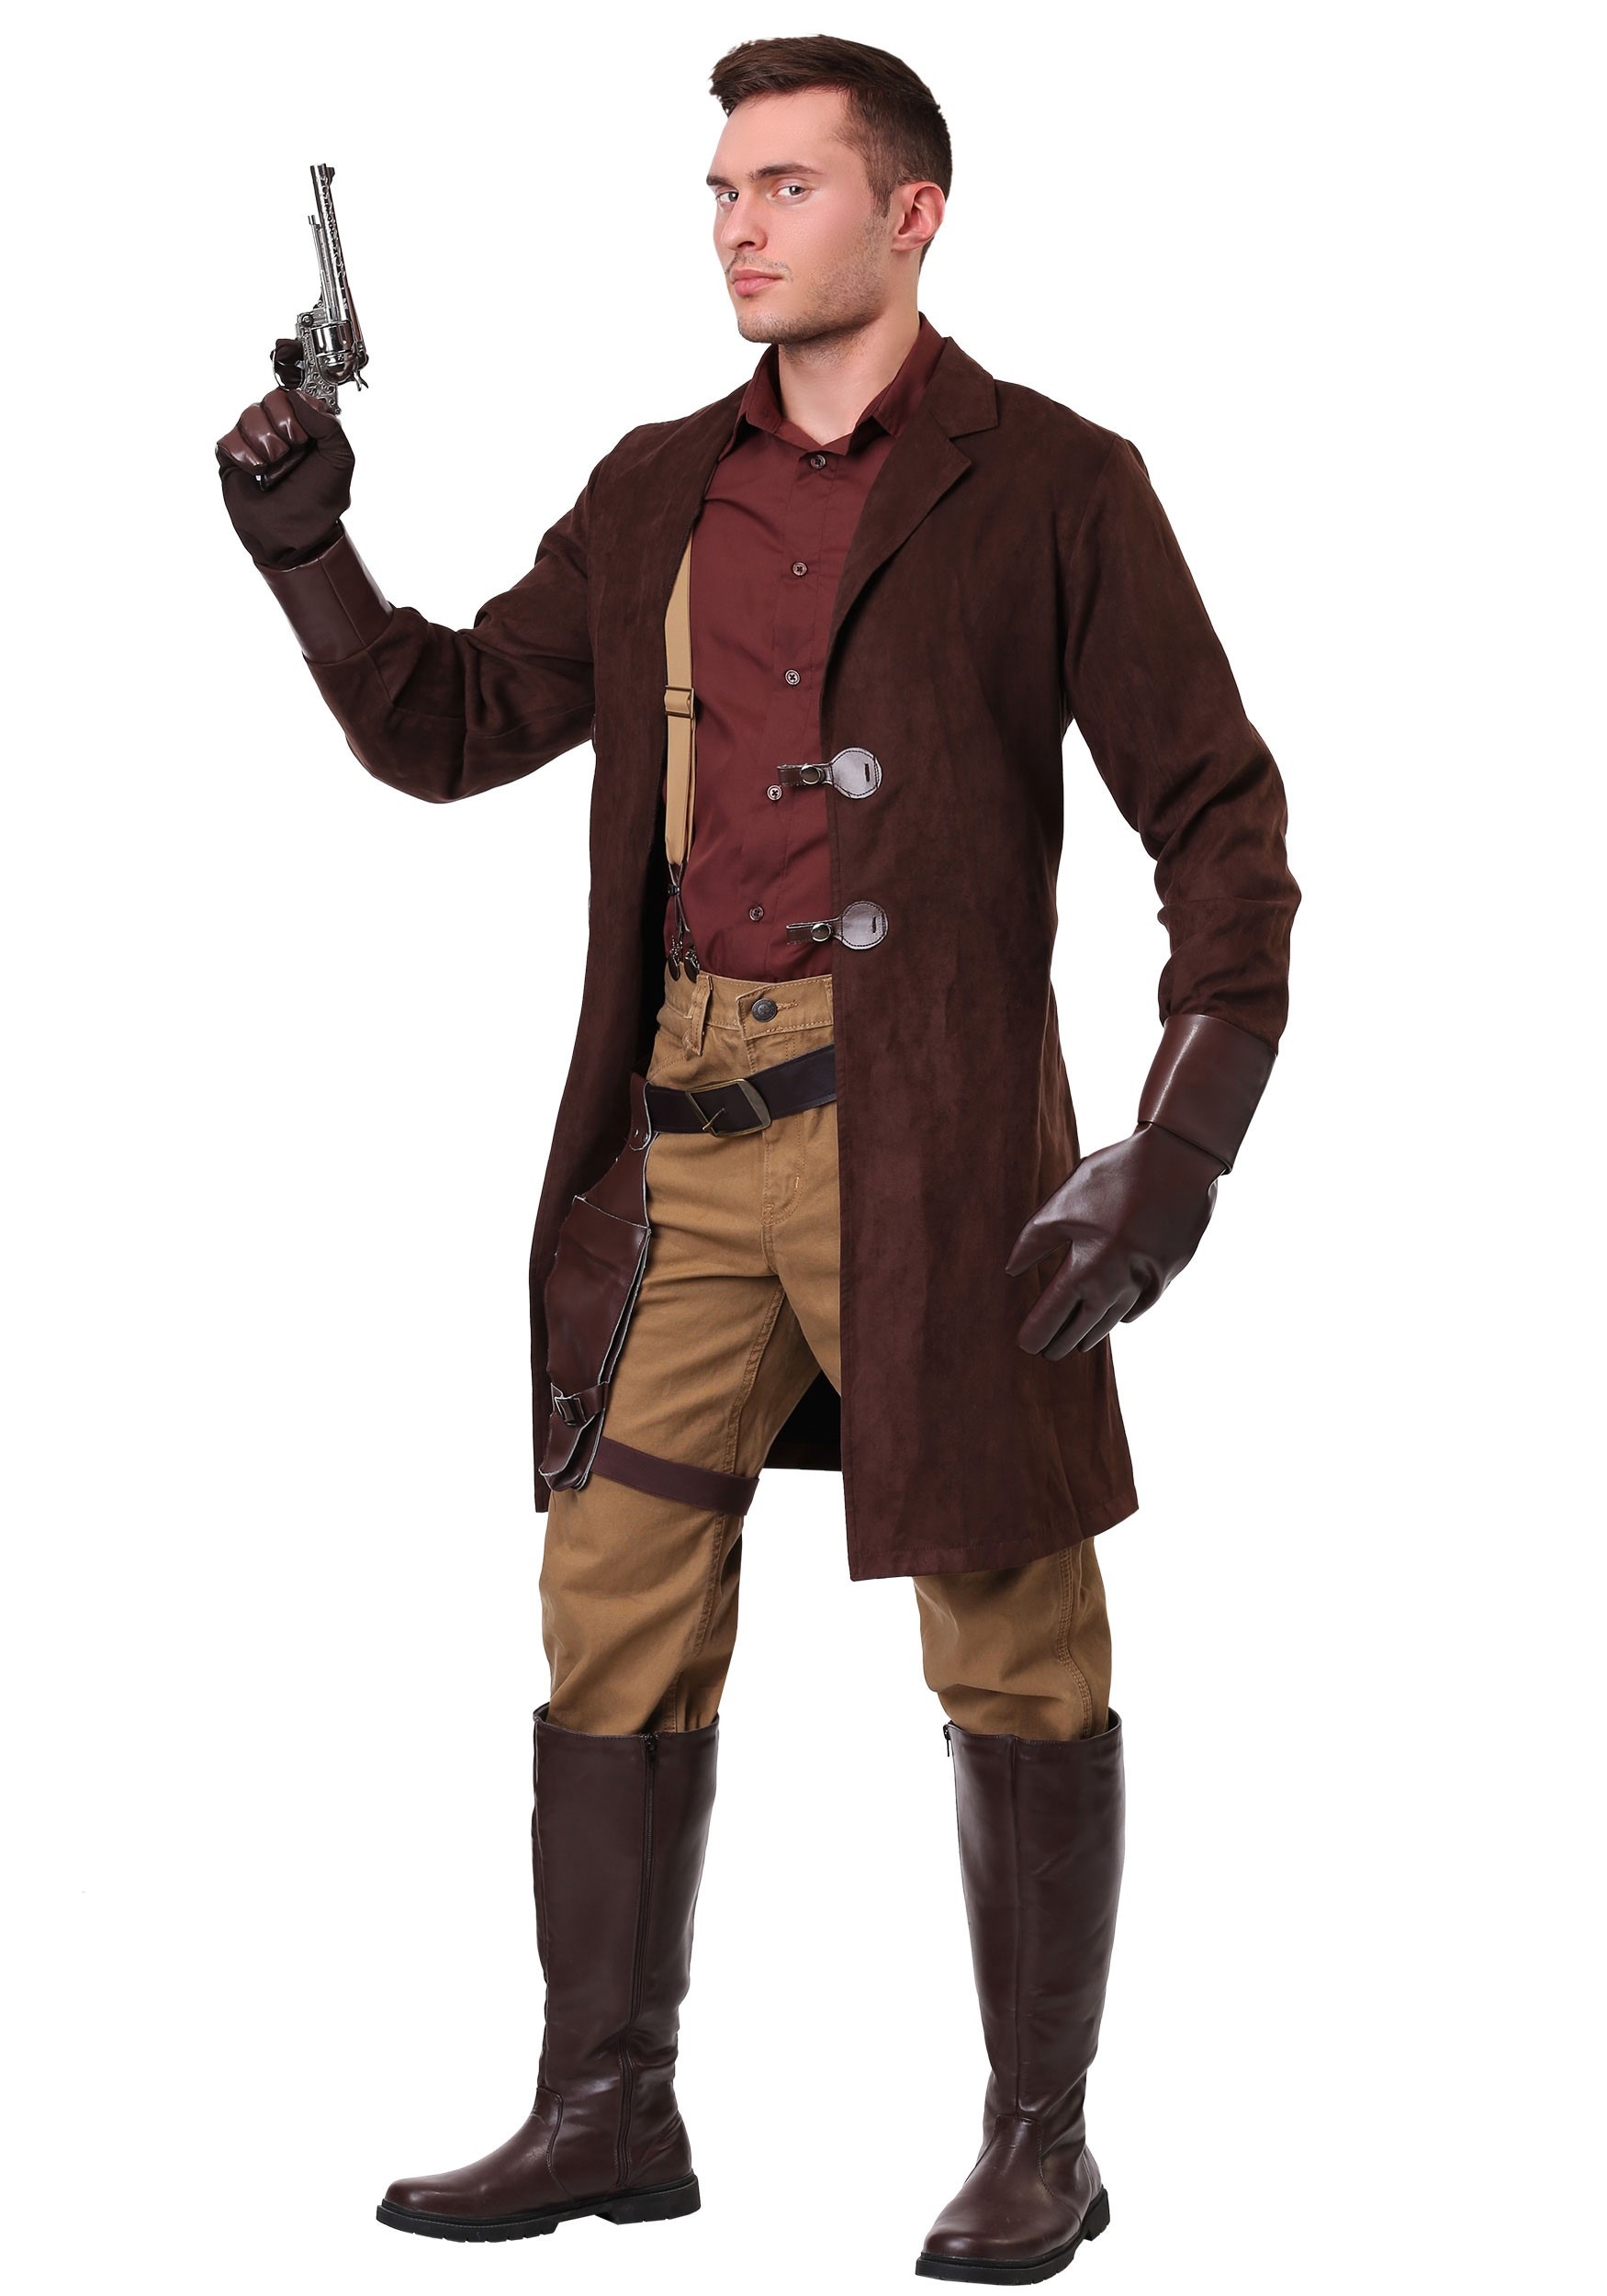 Photos - Fancy Dress Firefly FUN Costumes Men's Plus Size  Adult Malcolm Reynolds Costume Brown 